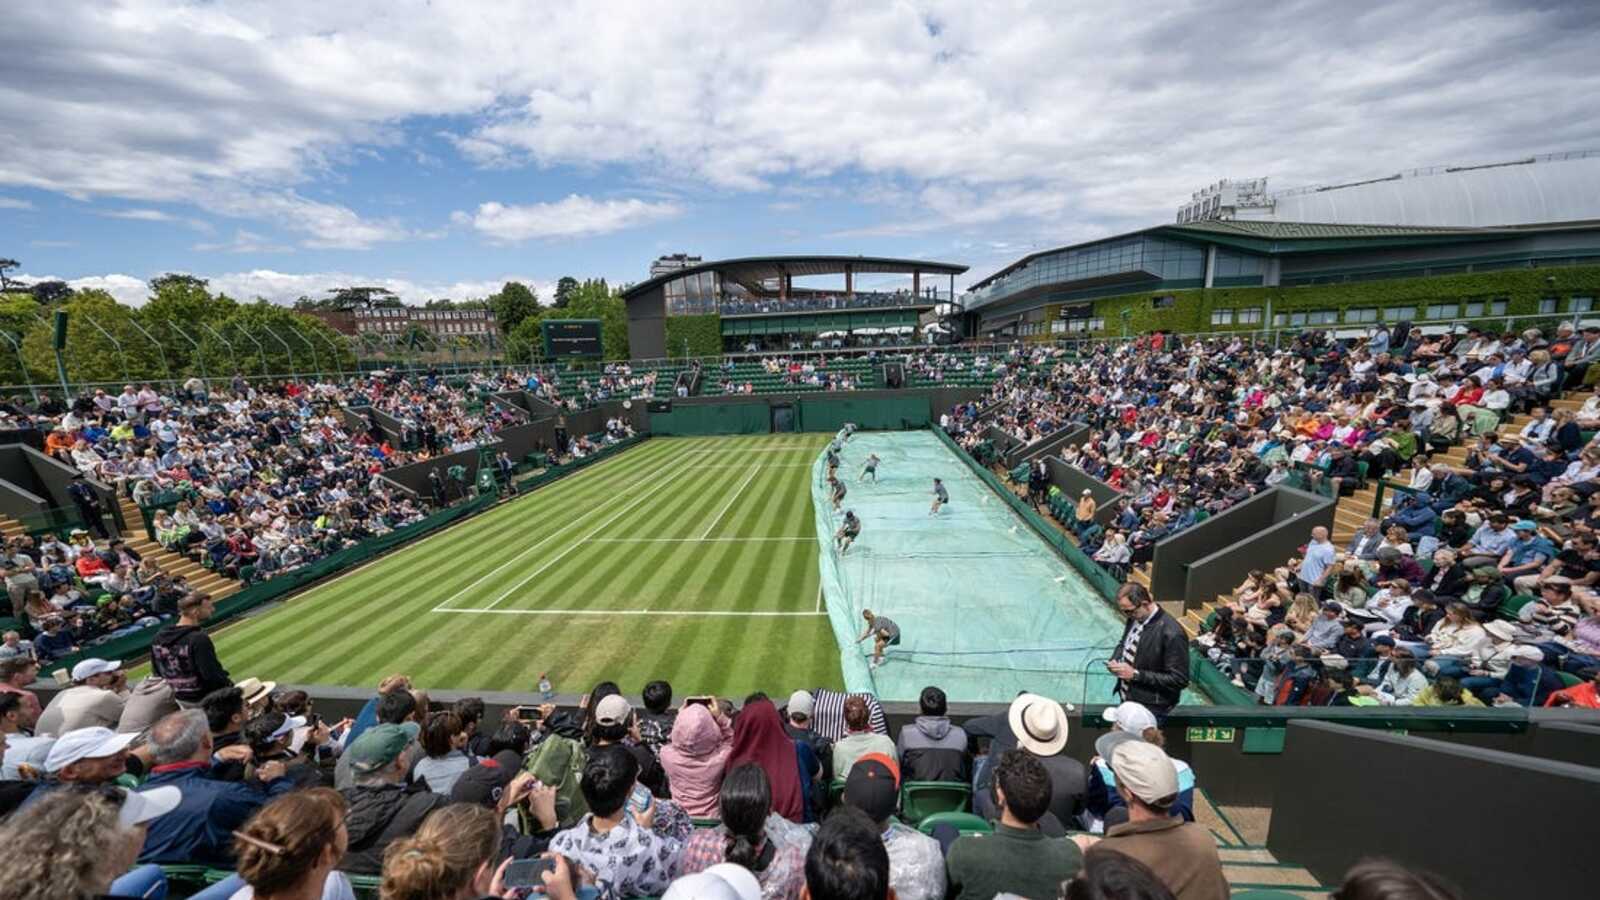 Court 18 incidents result in 3 arrests at Wimbledon